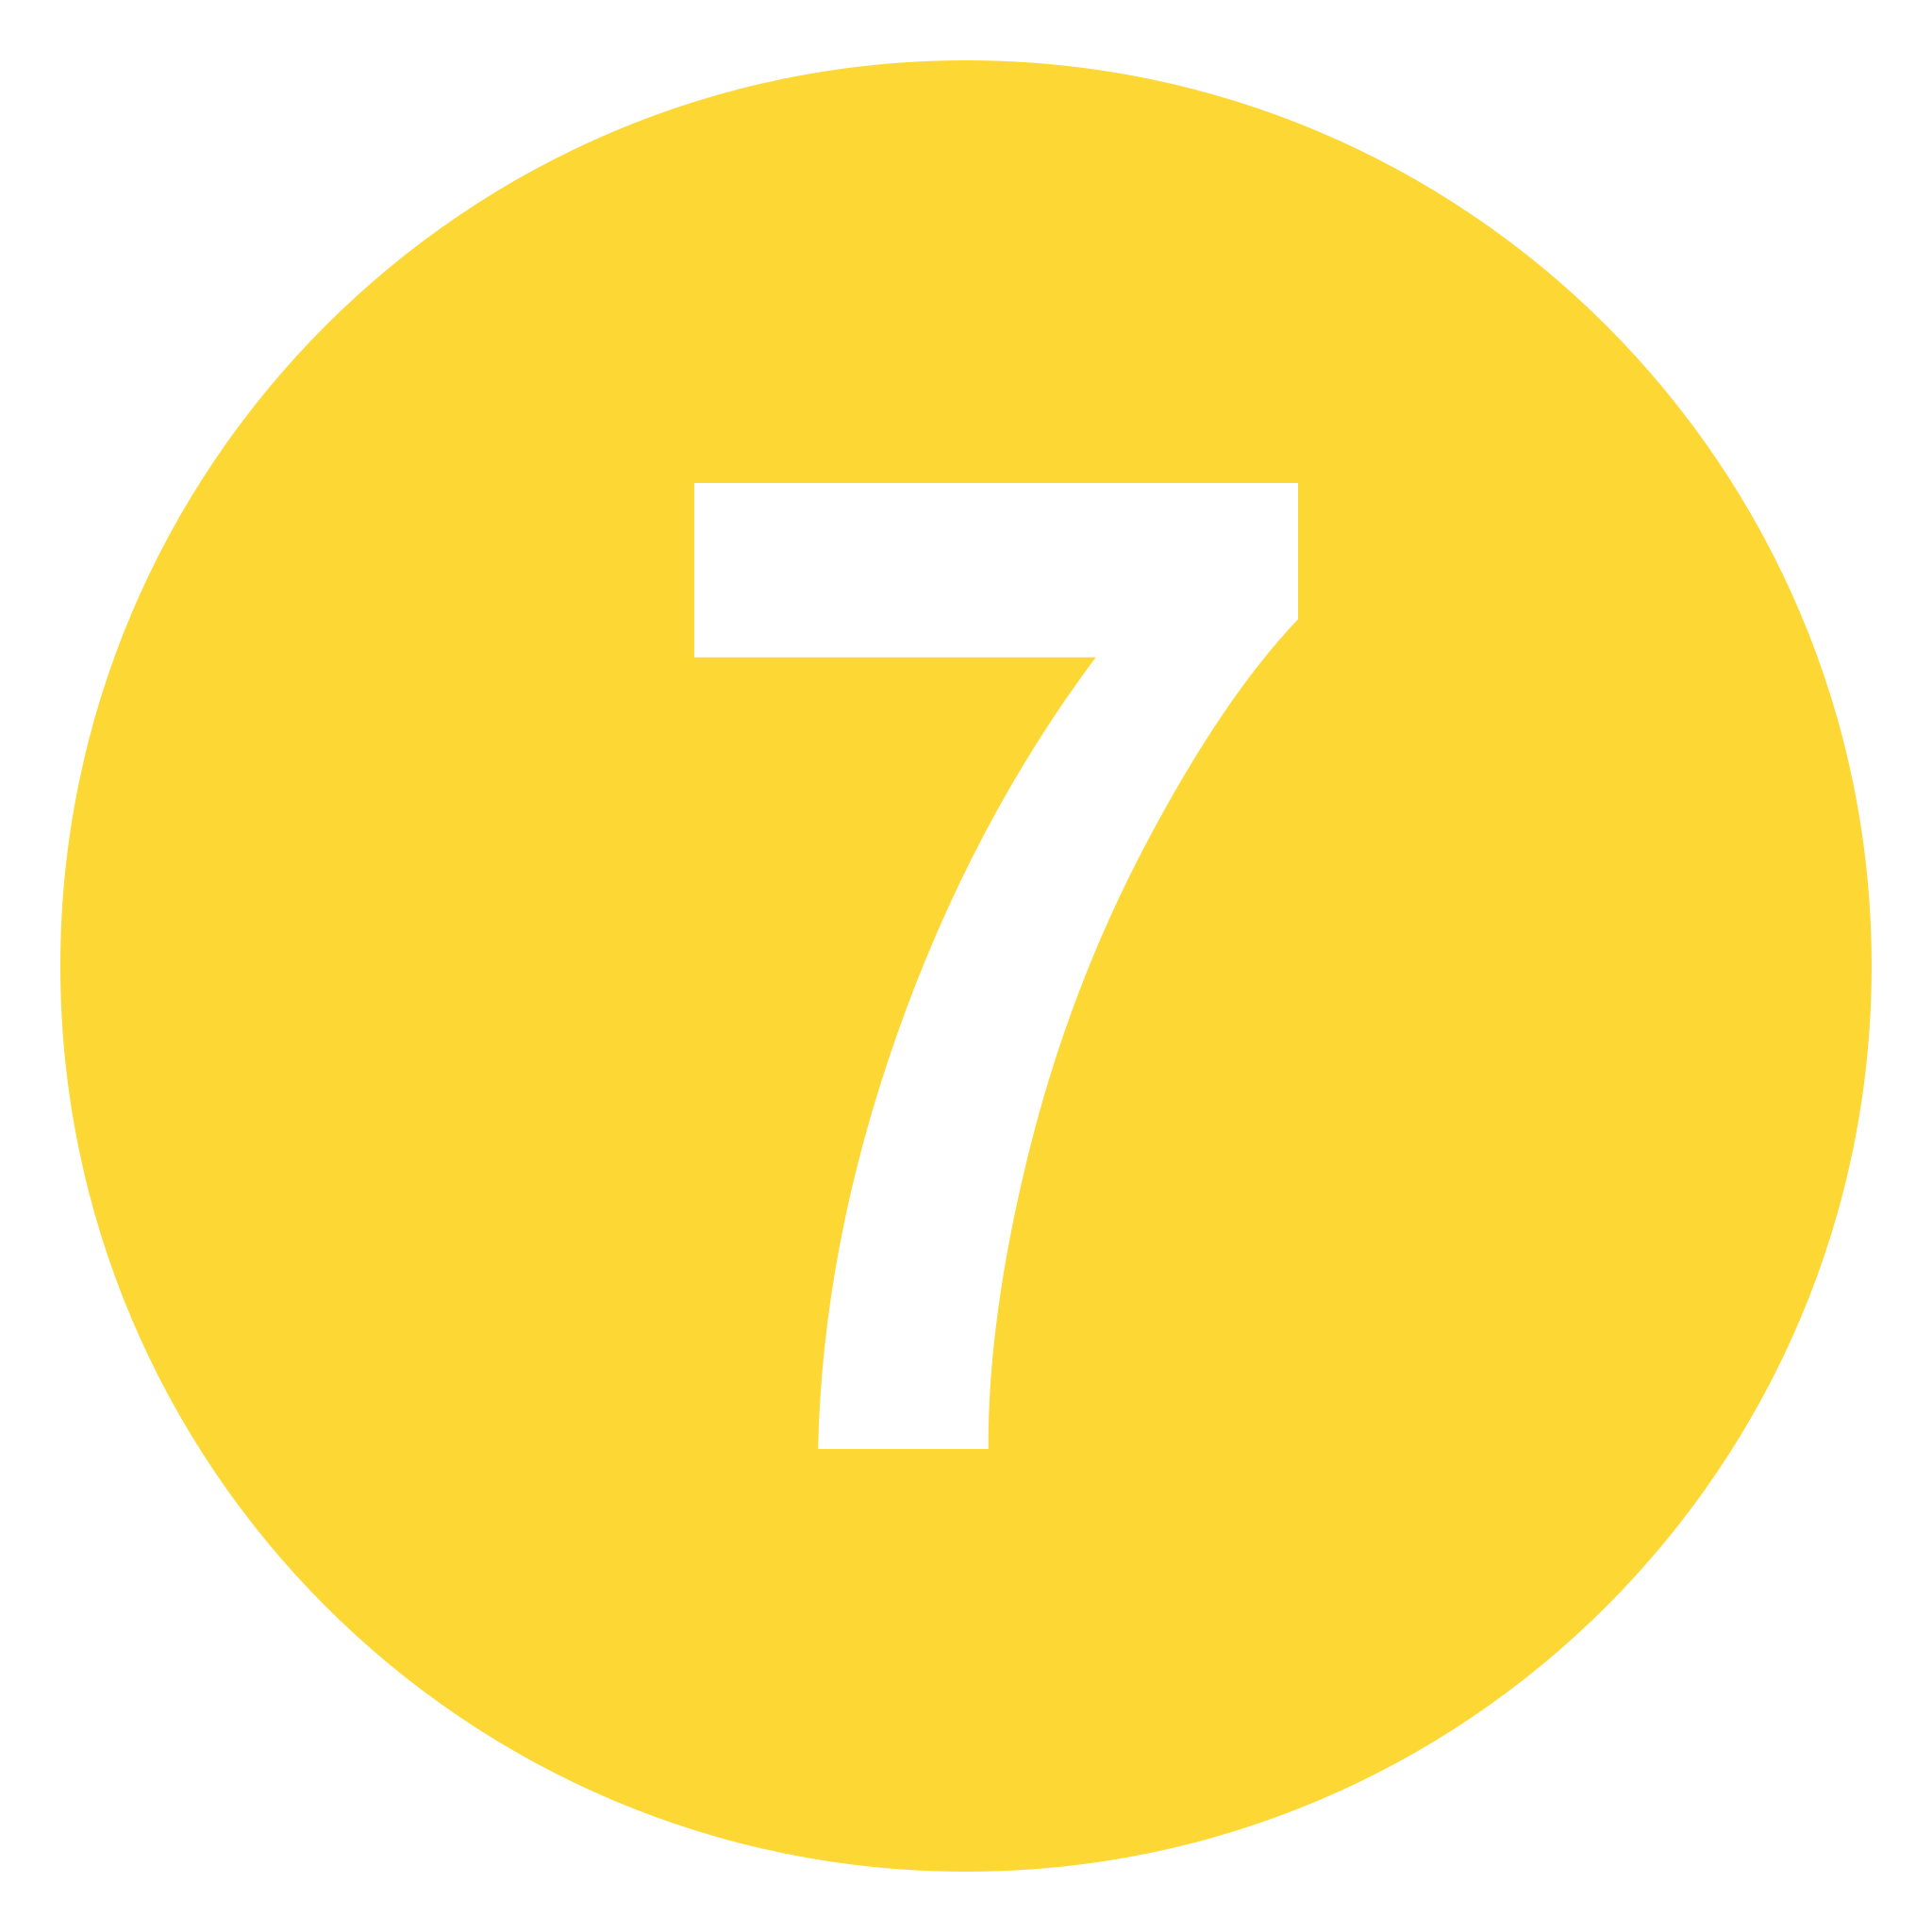 File:Eo circle yellow number-7.svg - Wikimedia Commons